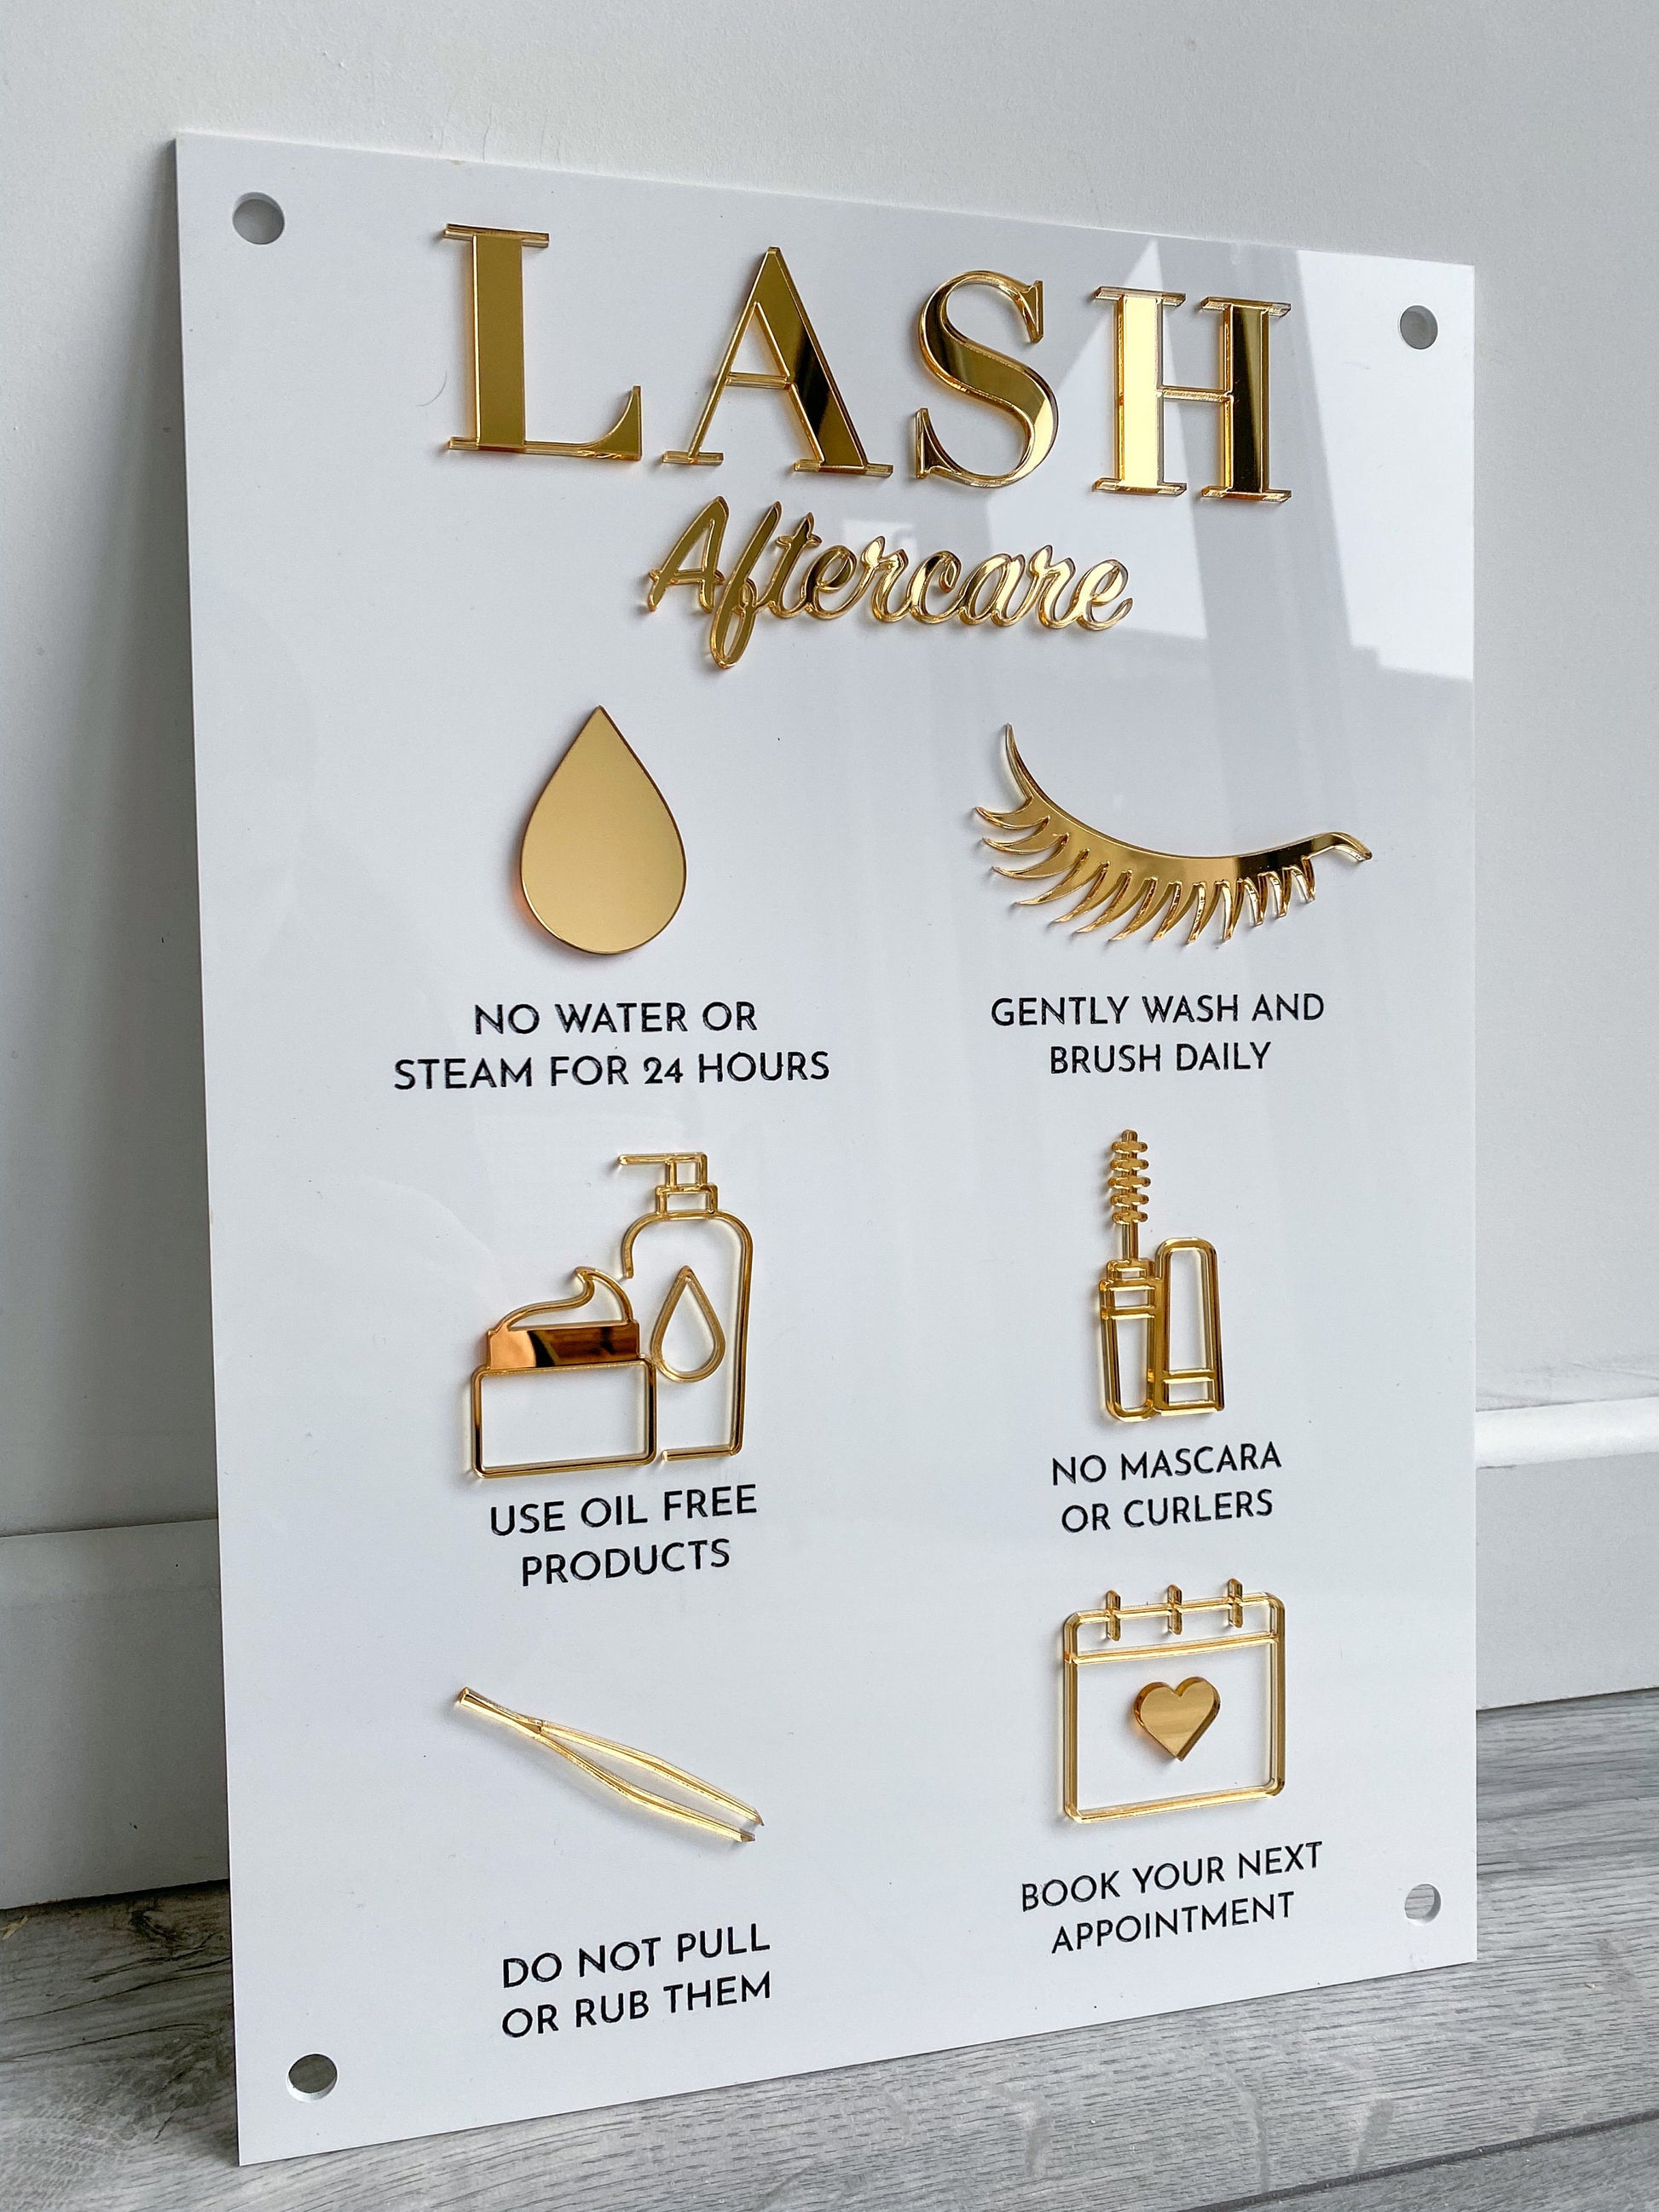 Lash aftercare  acrylic sign in white and gold 